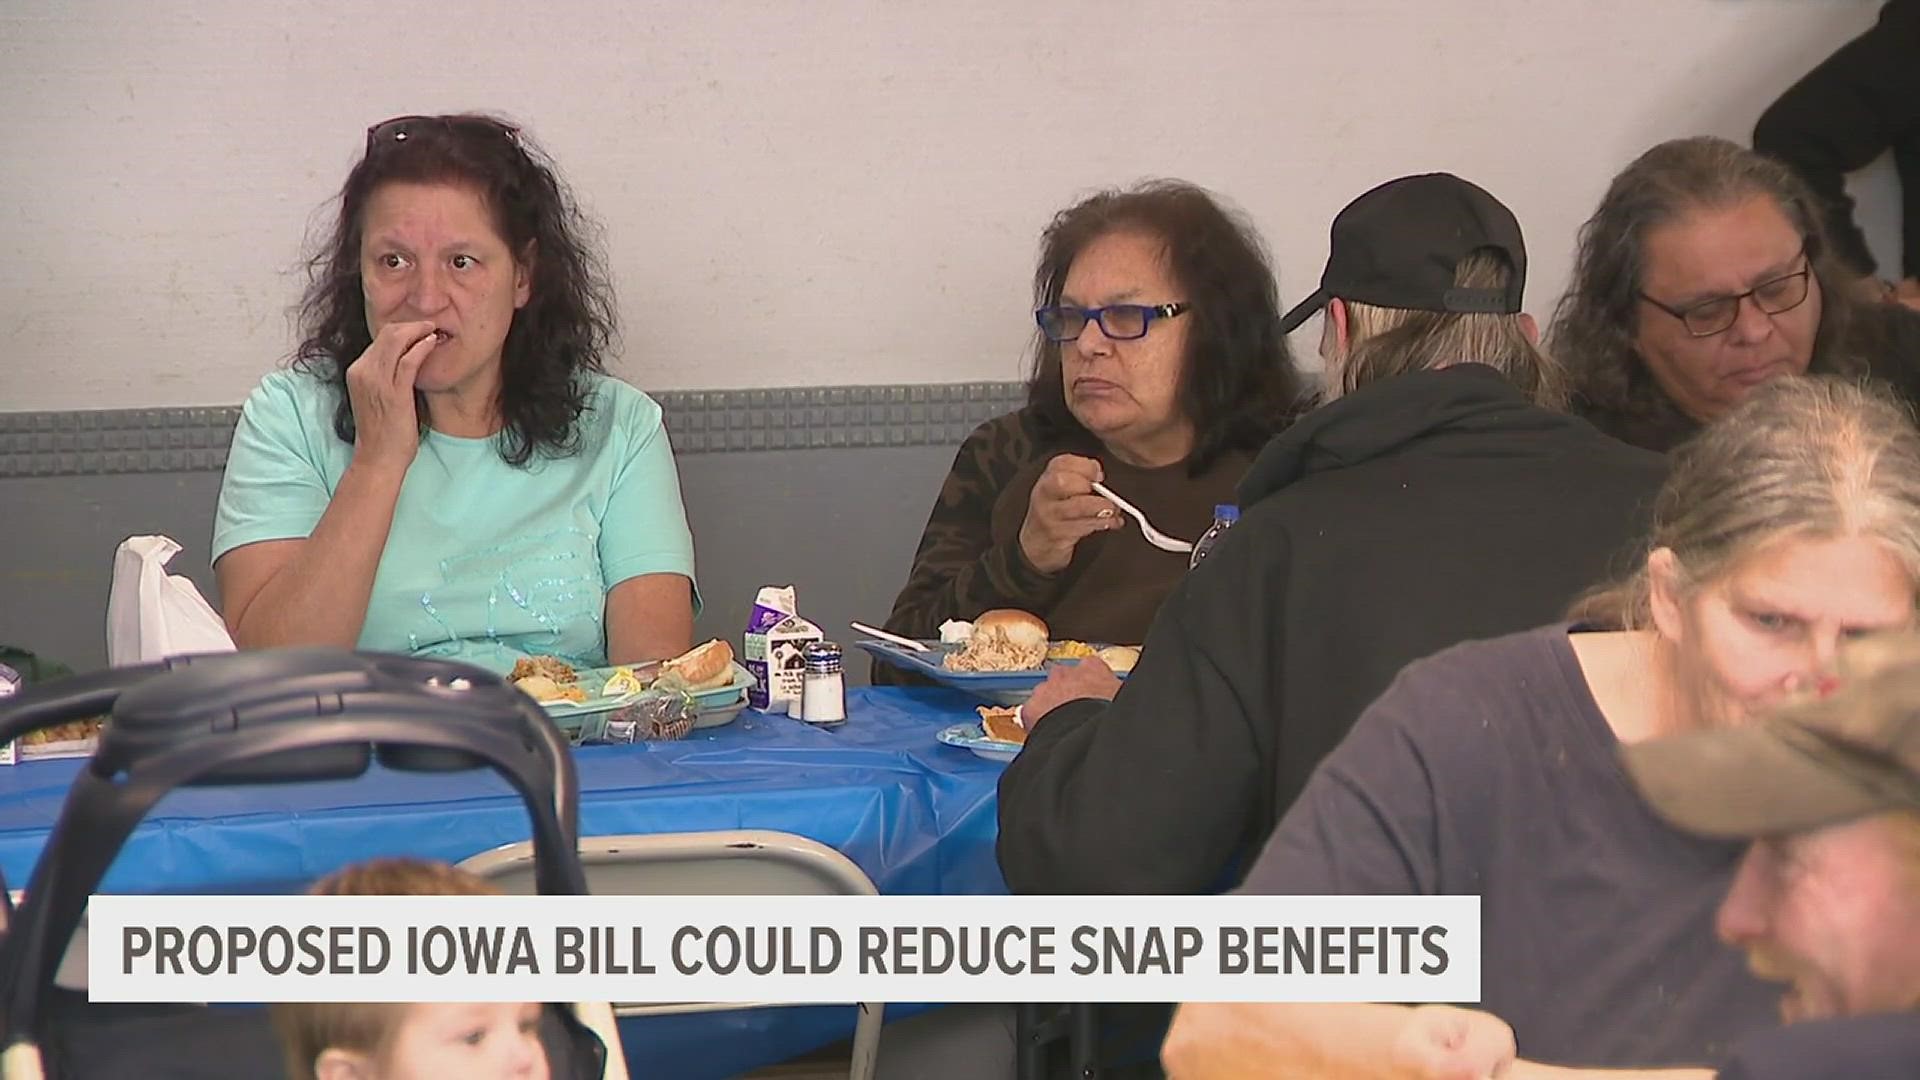 Iowa bill could make it tougher to access SNAP, nonprofits say